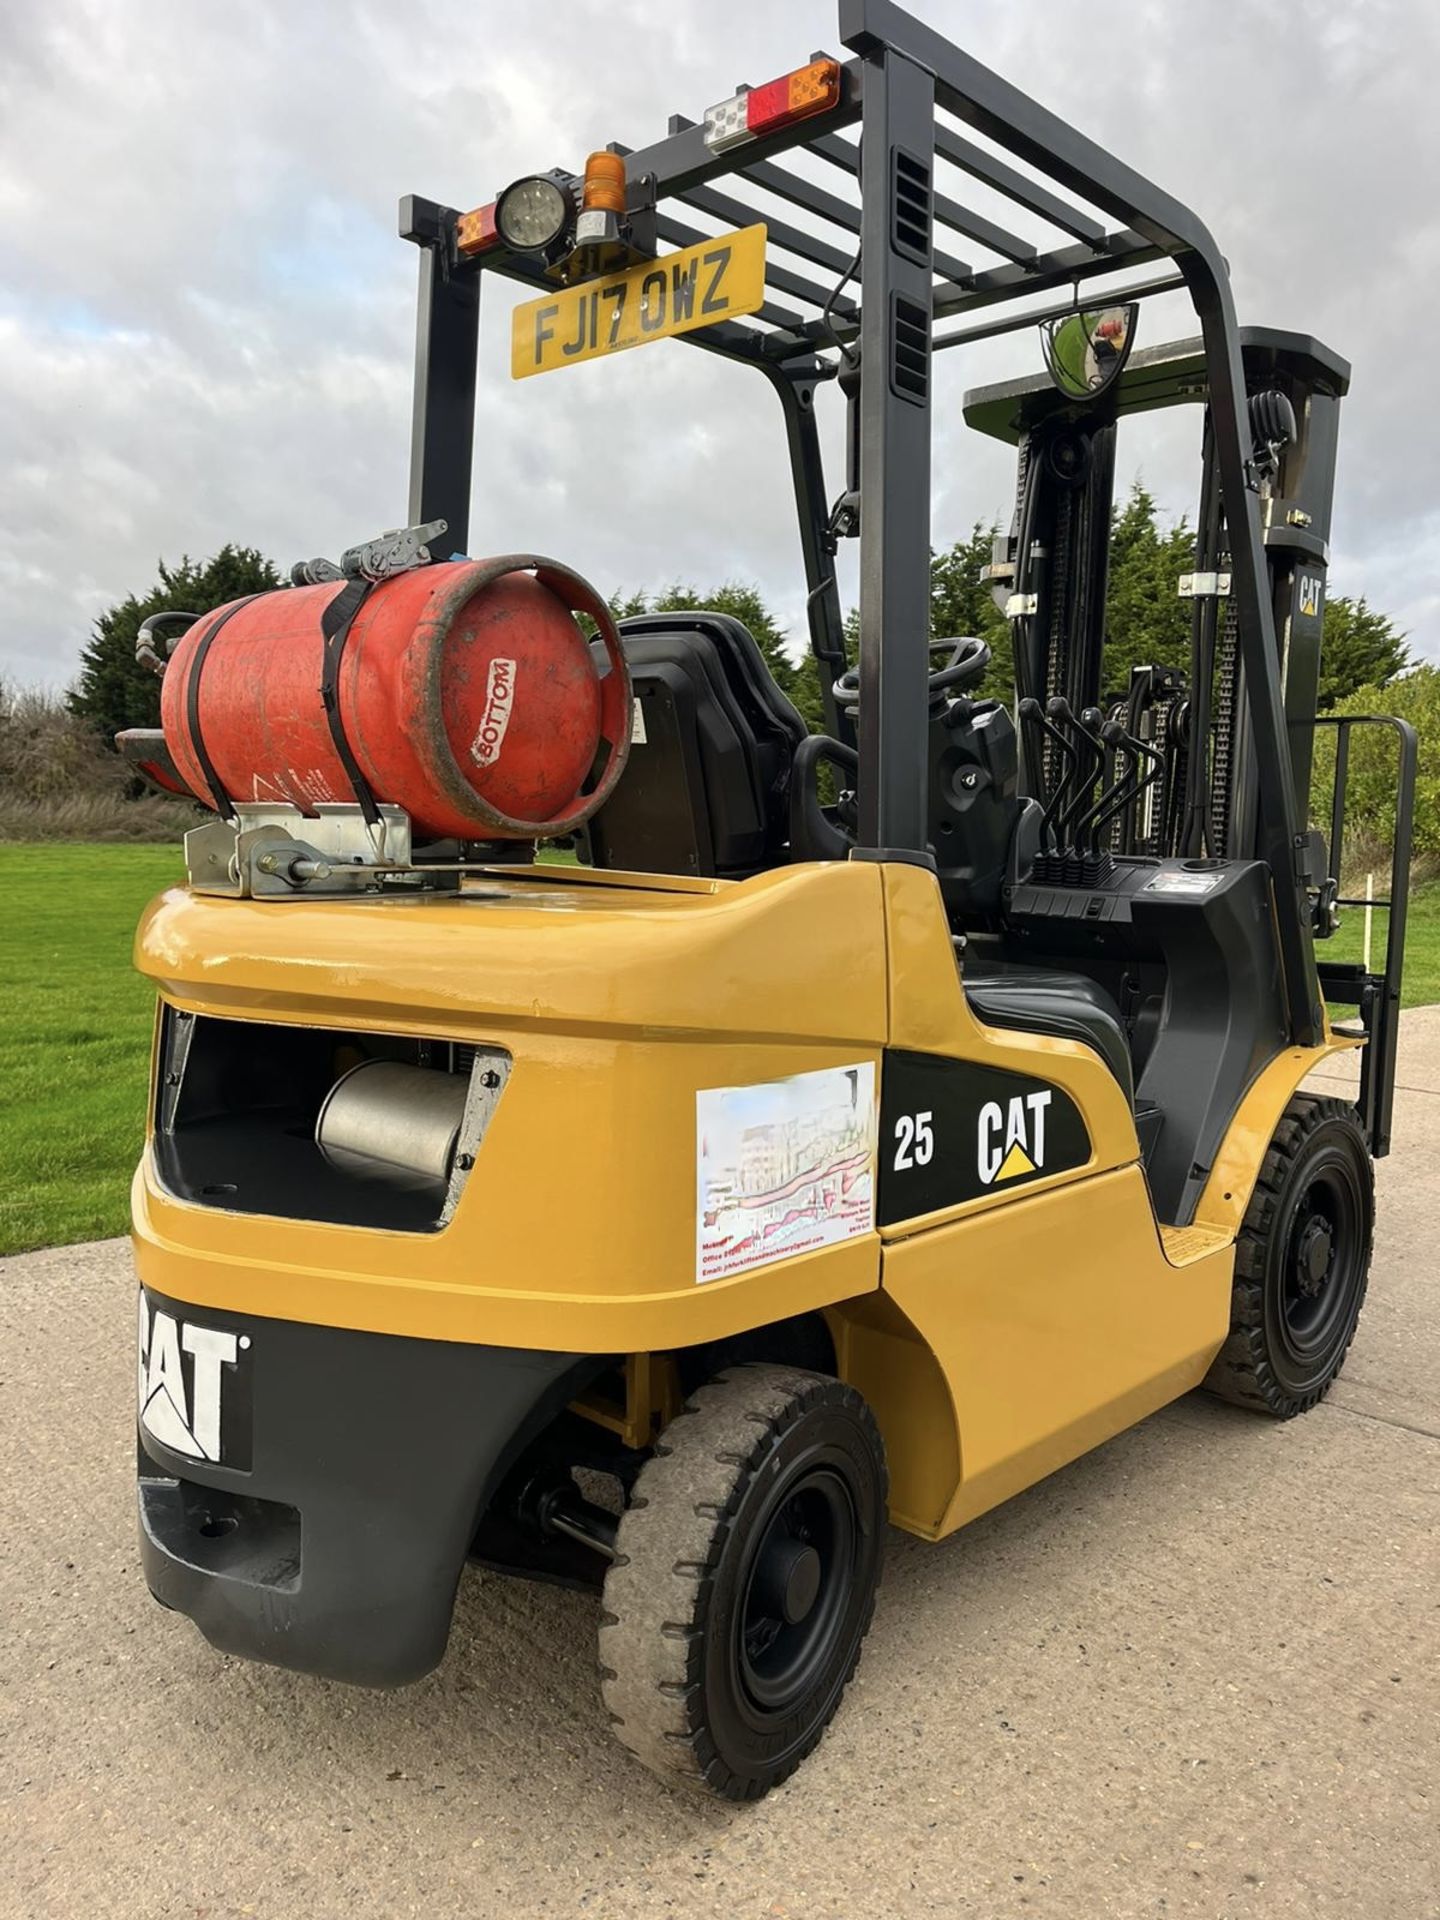 2017, CATERPILLAR 2.5 Tonne Gas Forklift (Container) Triple Mast - Image 6 of 10